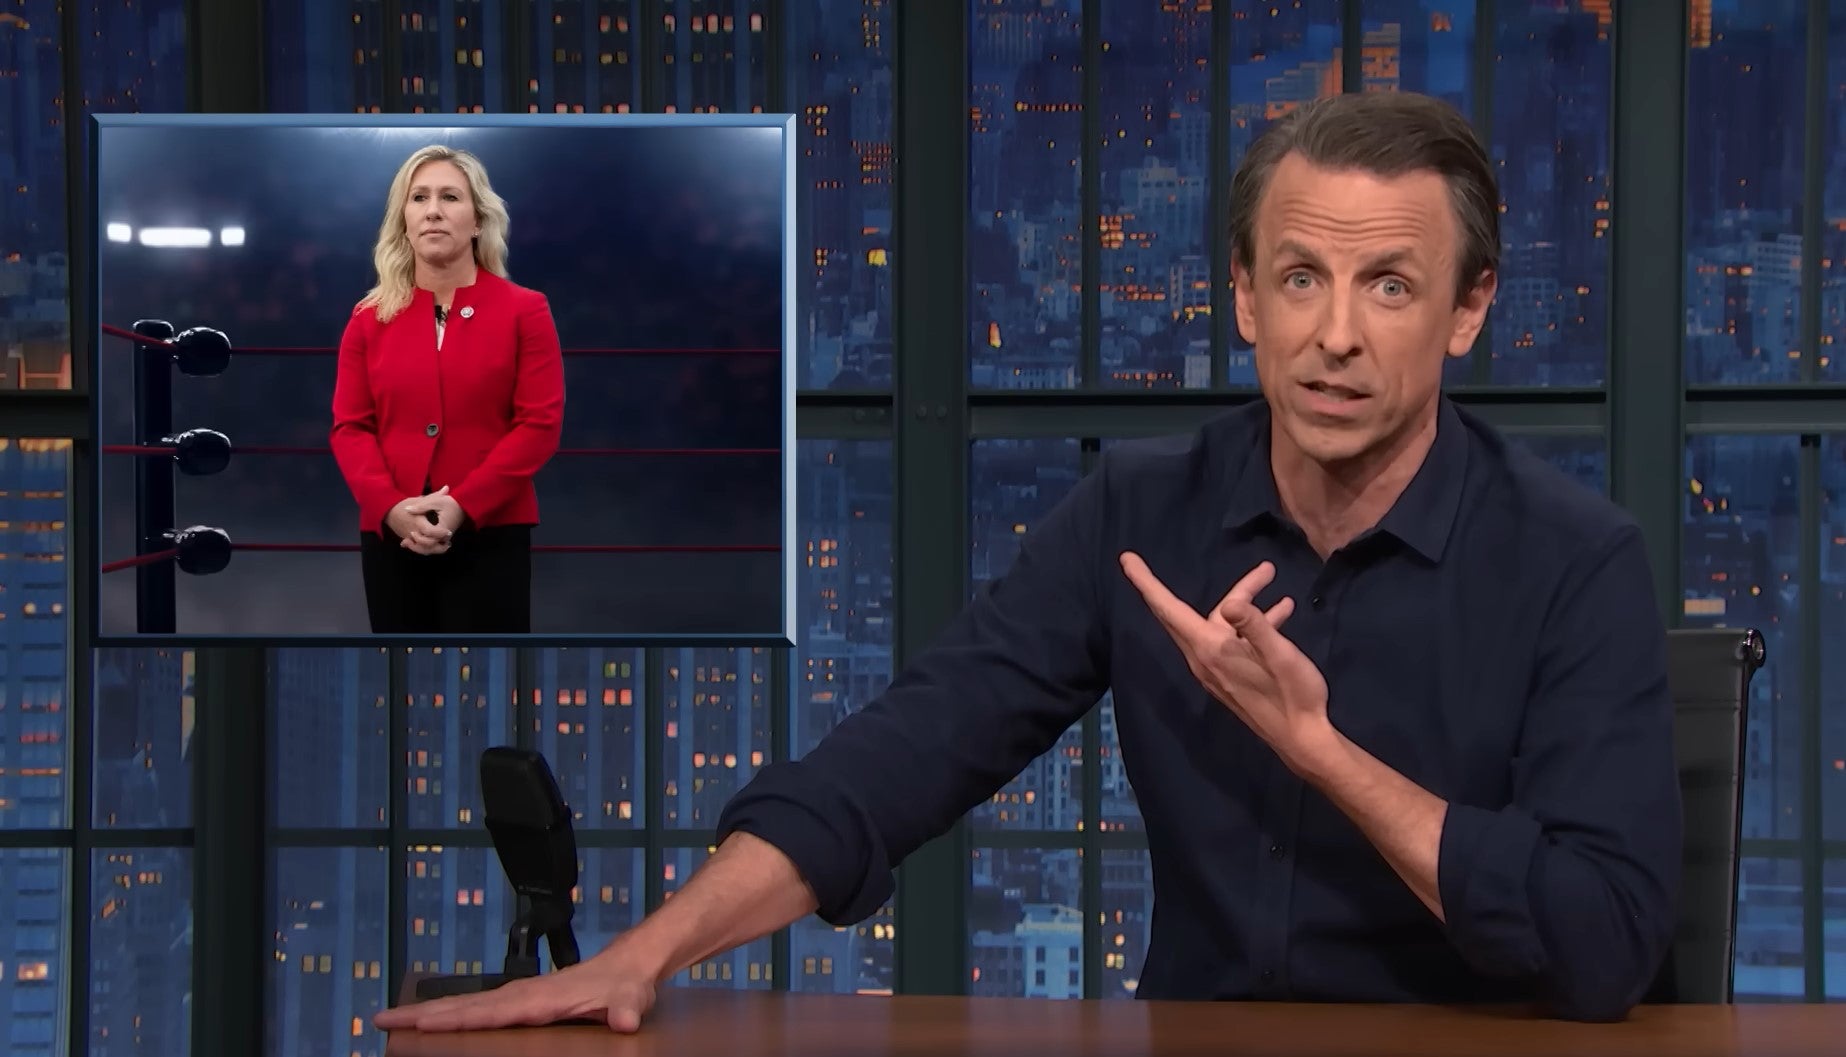 Seth Meyers mocked Marjorie Taylor Greene using a ‘backhanded compliment’ from a Donald Trump rally